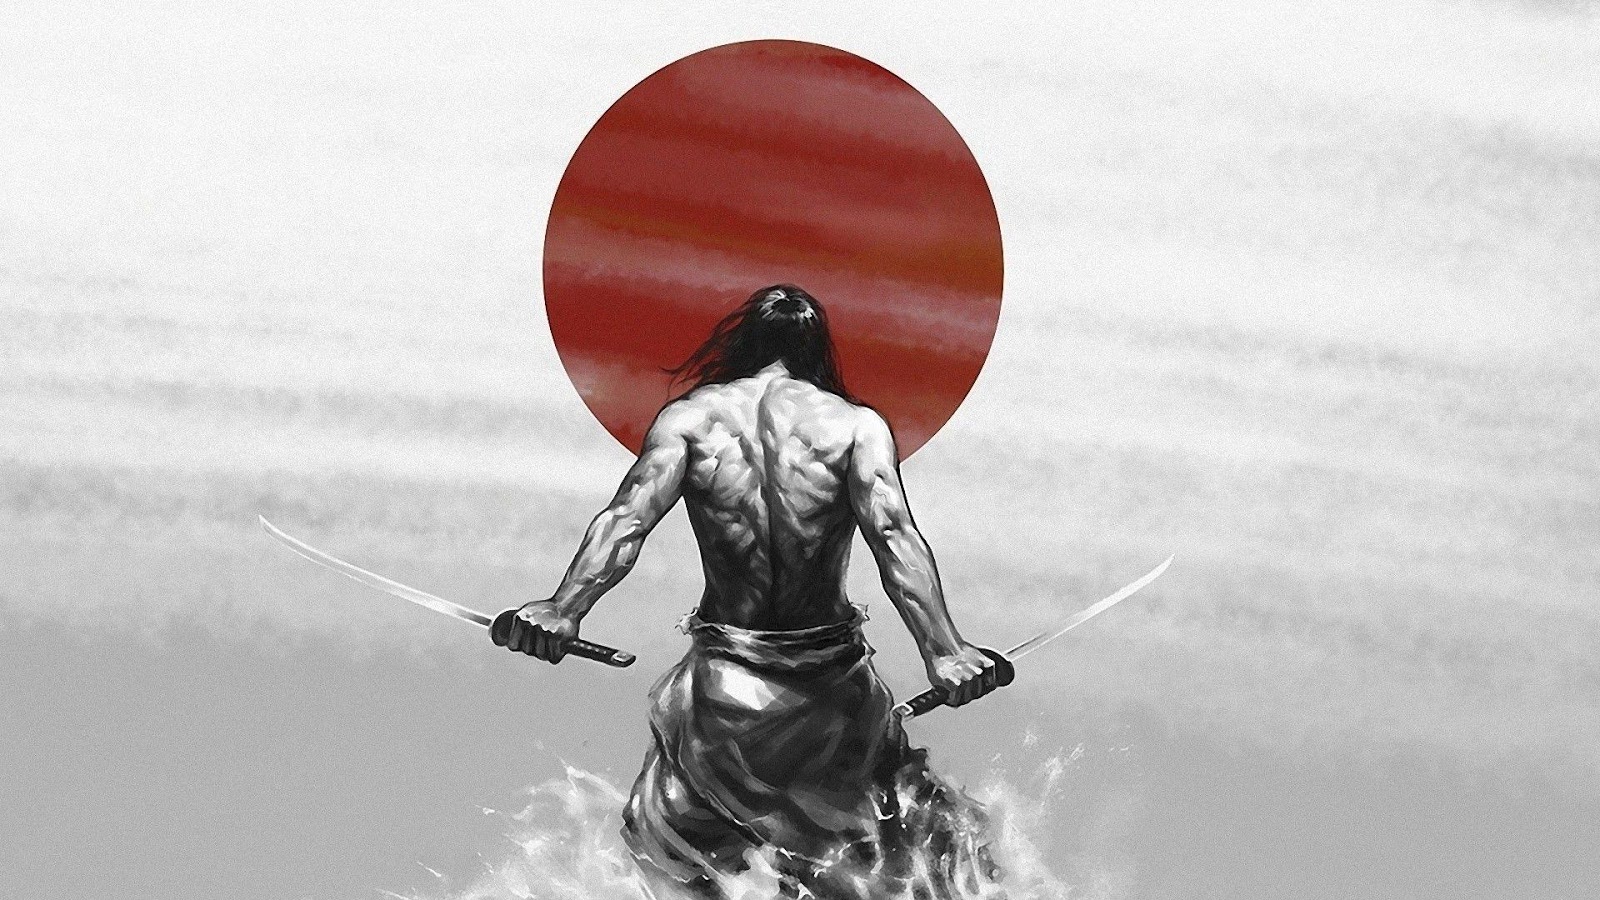 Samurai Live Wallpaper - Android Apps on Google Play